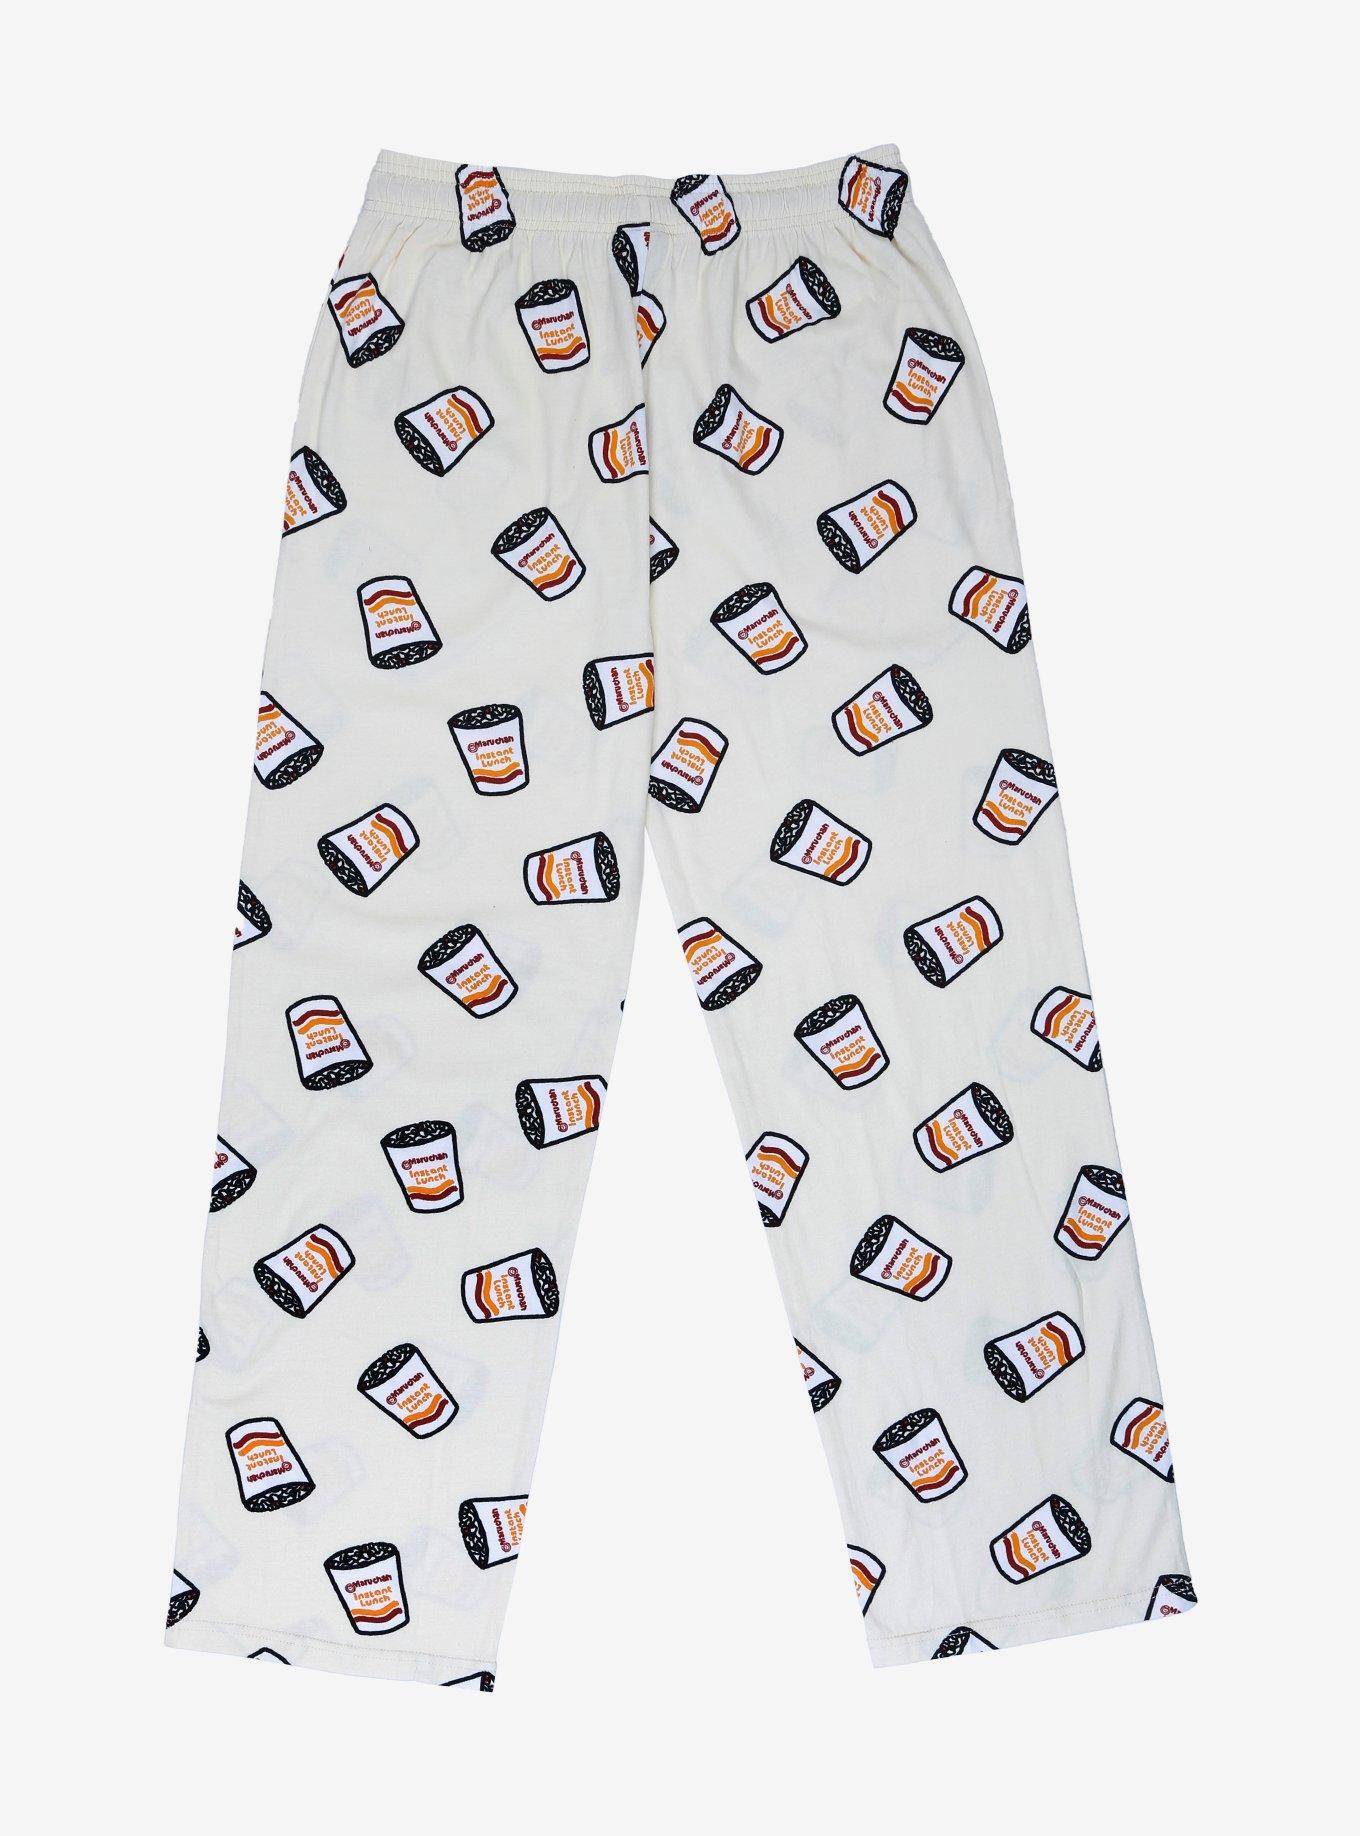 Maruchan Instant Lunch Allover Print Sleep Pants - BoxLunch Exclusive, MULTI, alternate